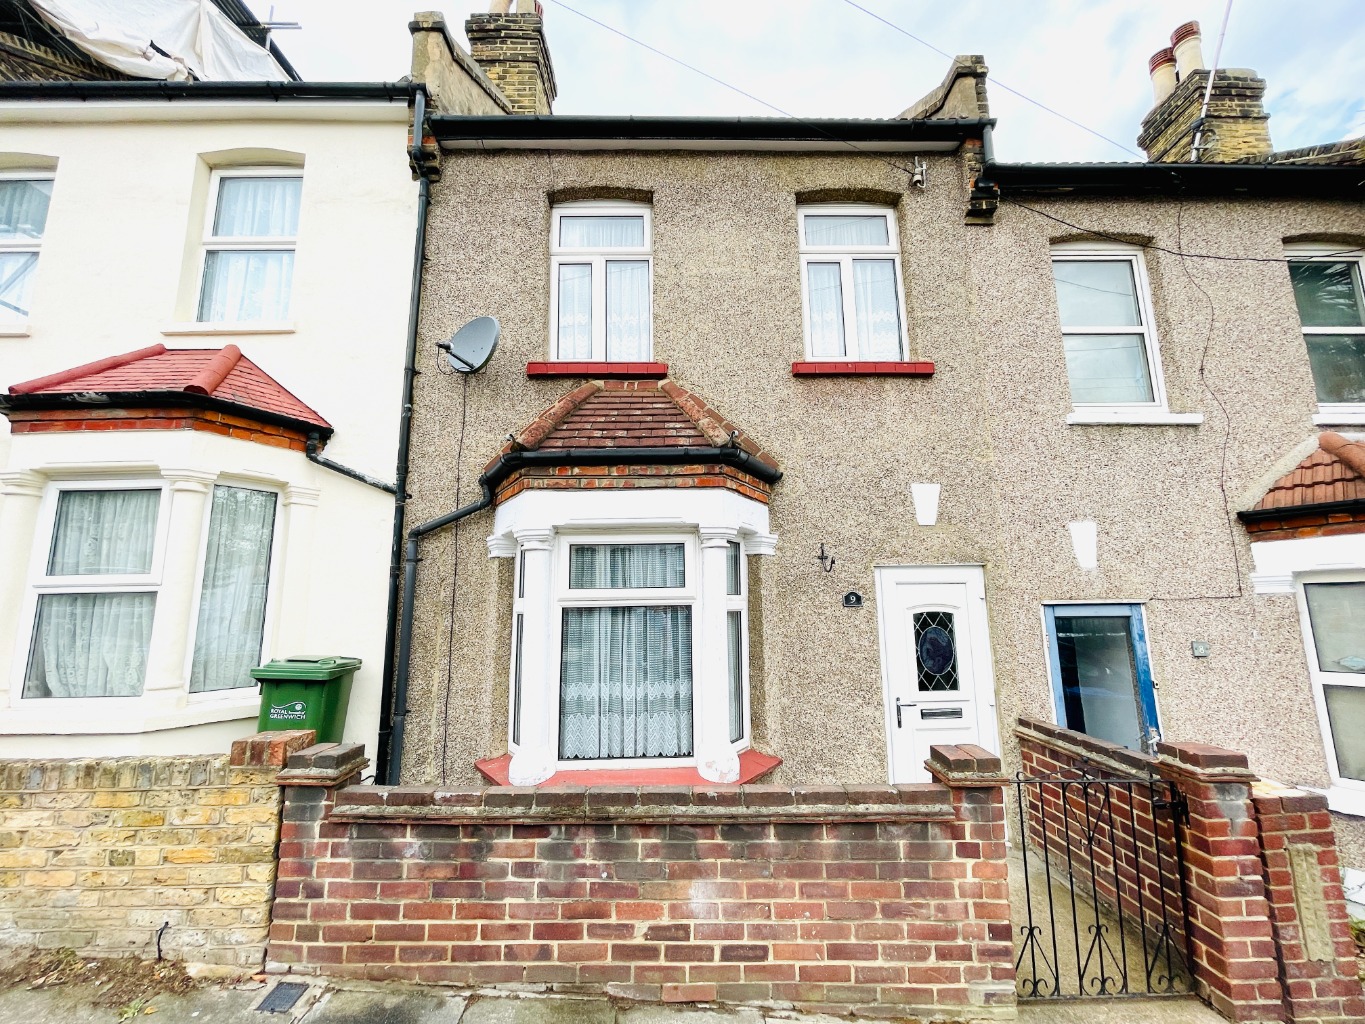 Beaumont Gibbs are pleased to offer this two/ three bedroom mid terrace home for sale.